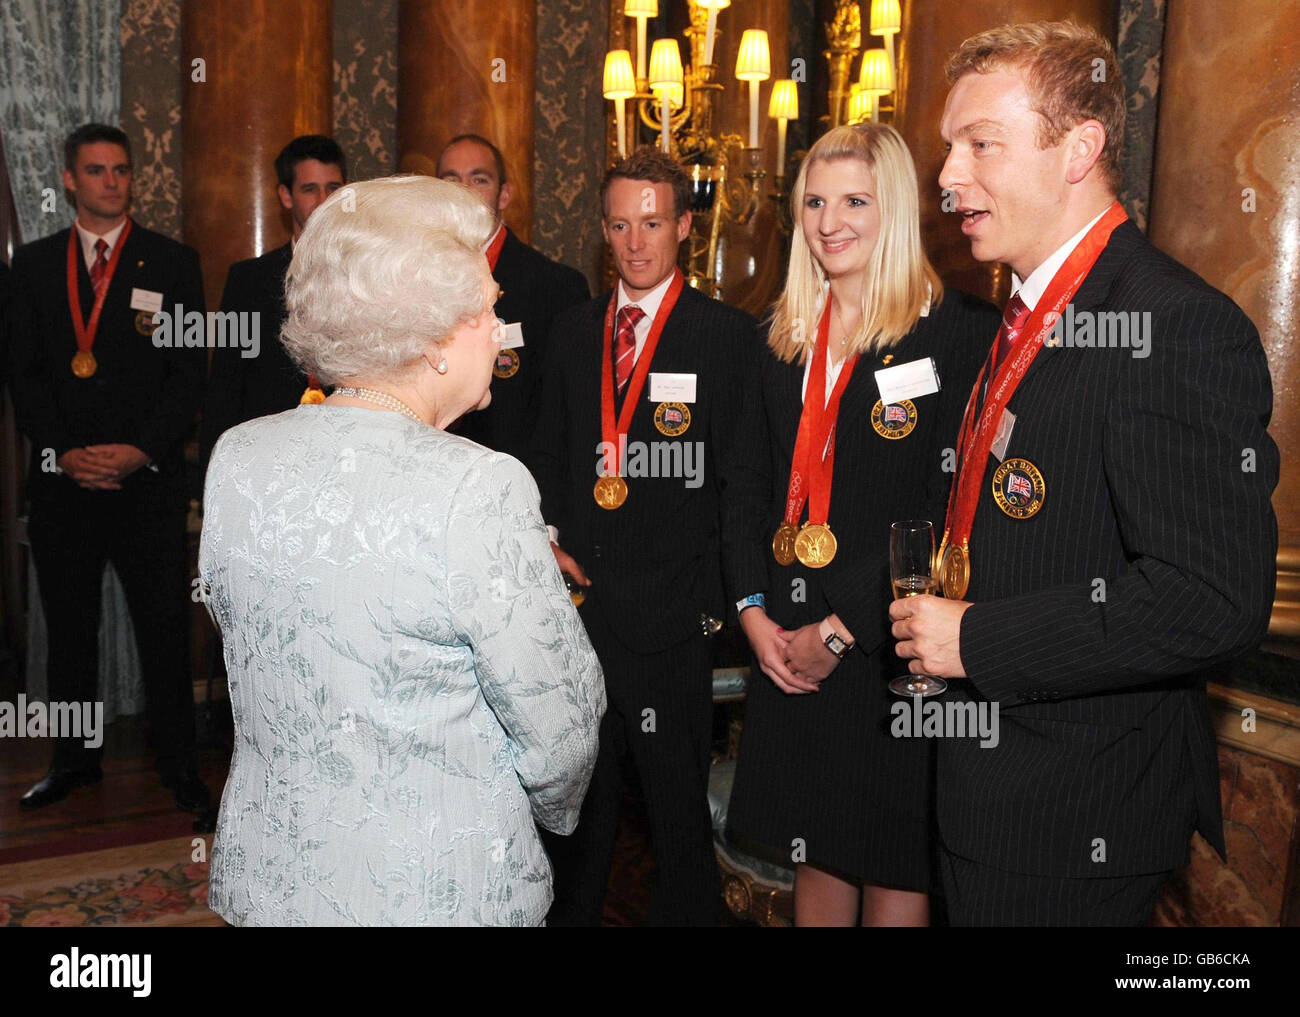 Britain's Queen Elizabeth II meets Olympic medalists Chris Hoy (right) and Rebecca Adlington (centre right) during the Beijing Olympics Team GB reception at Buckingham Palace in London. Stock Photo